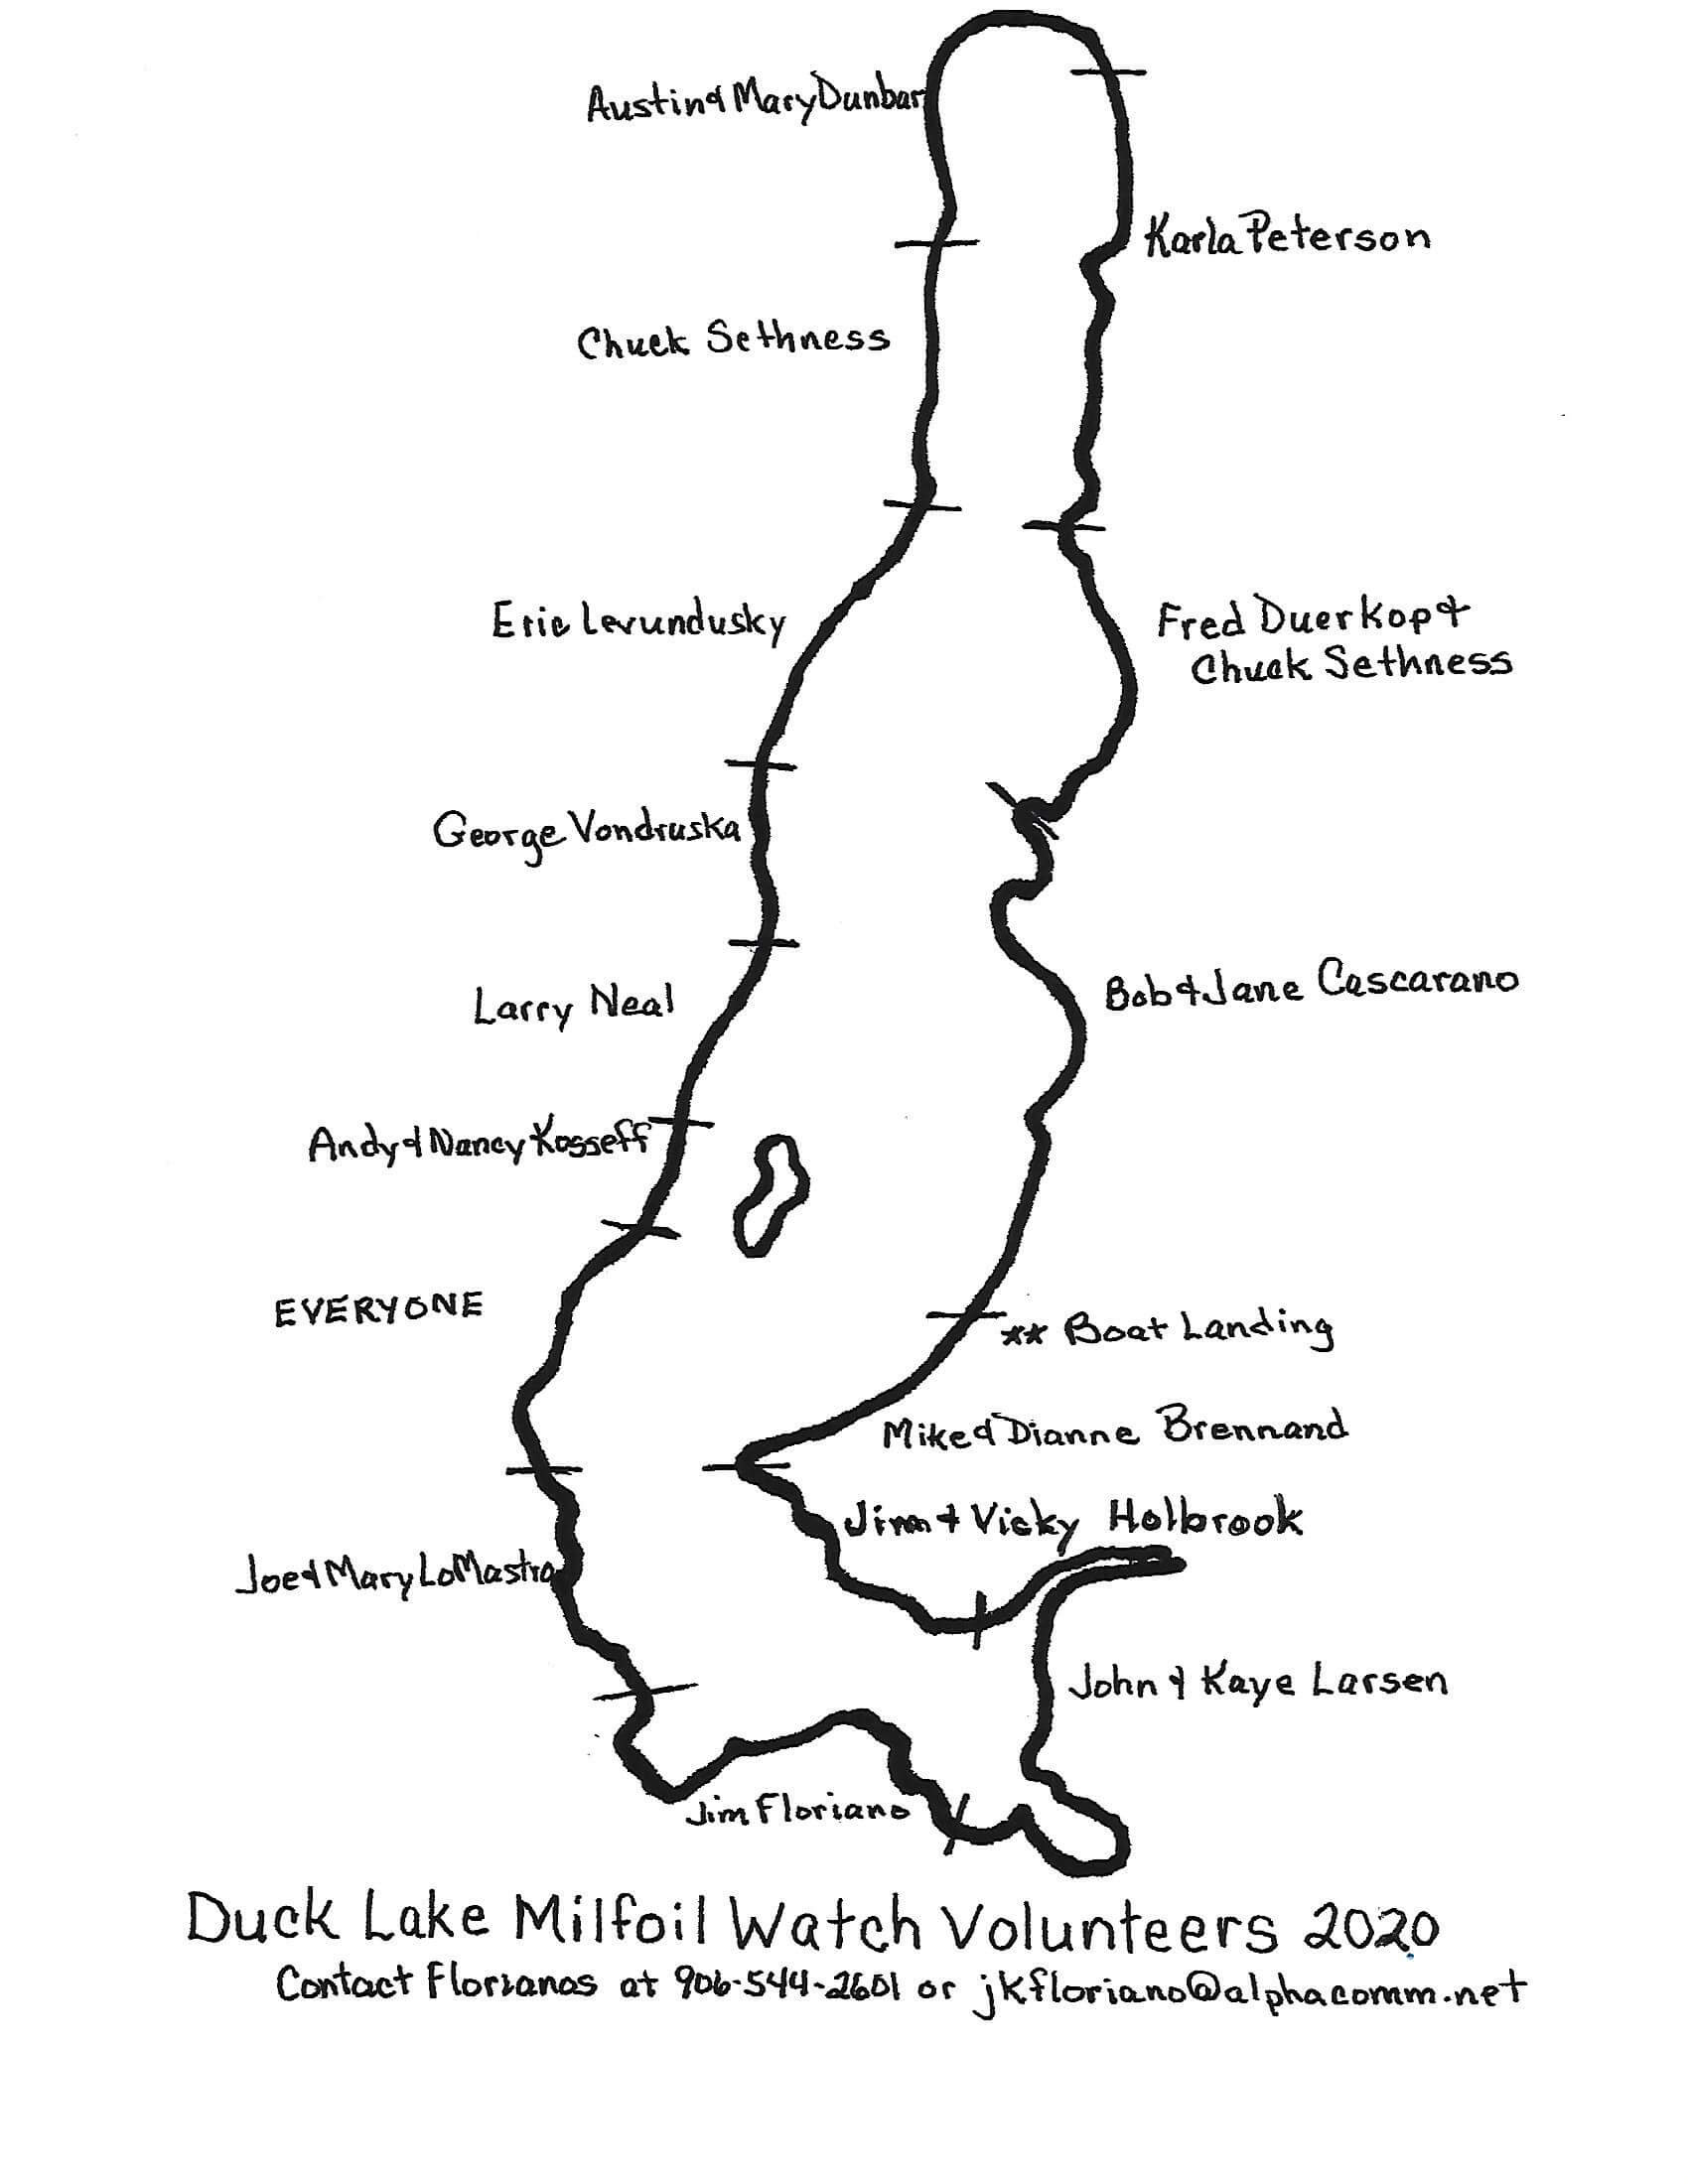 Map showing which members are monitoring certain parts of Duck Lake